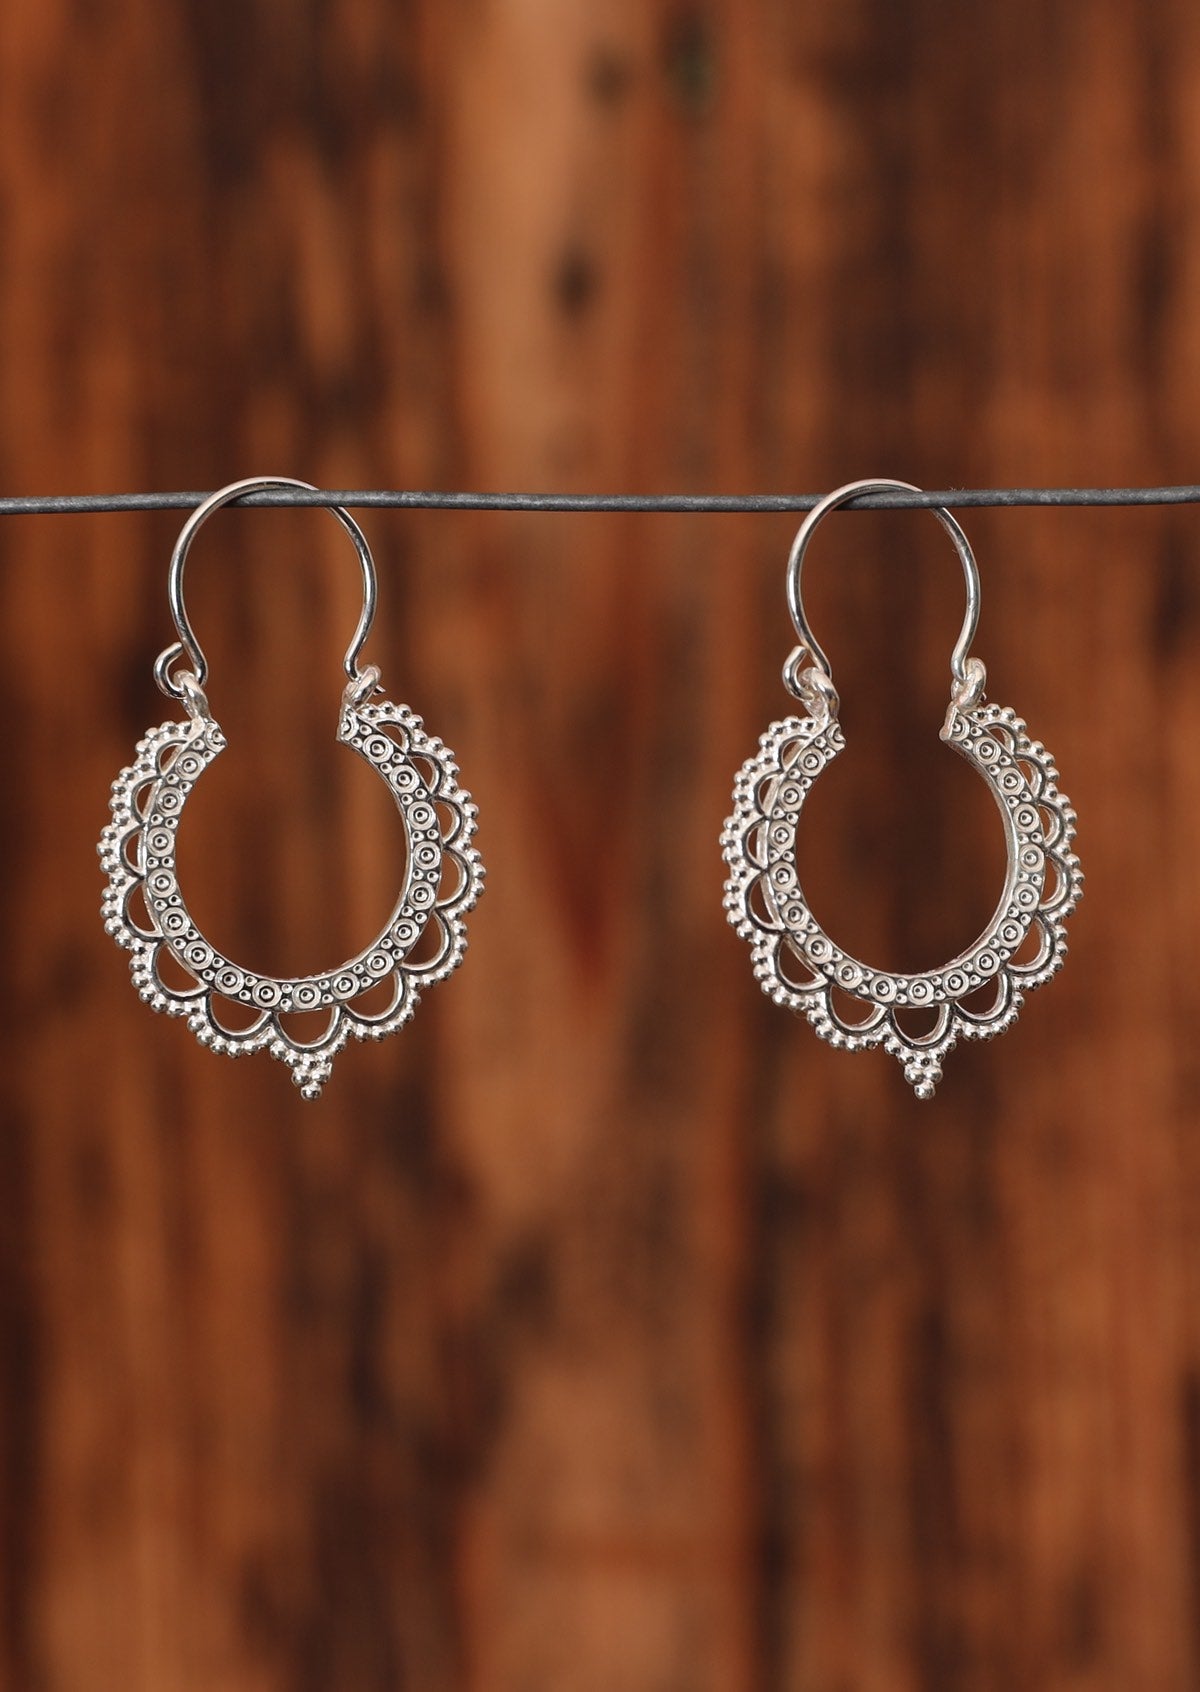 92.5% silver lace style hoop earrings sit on a wire for display.